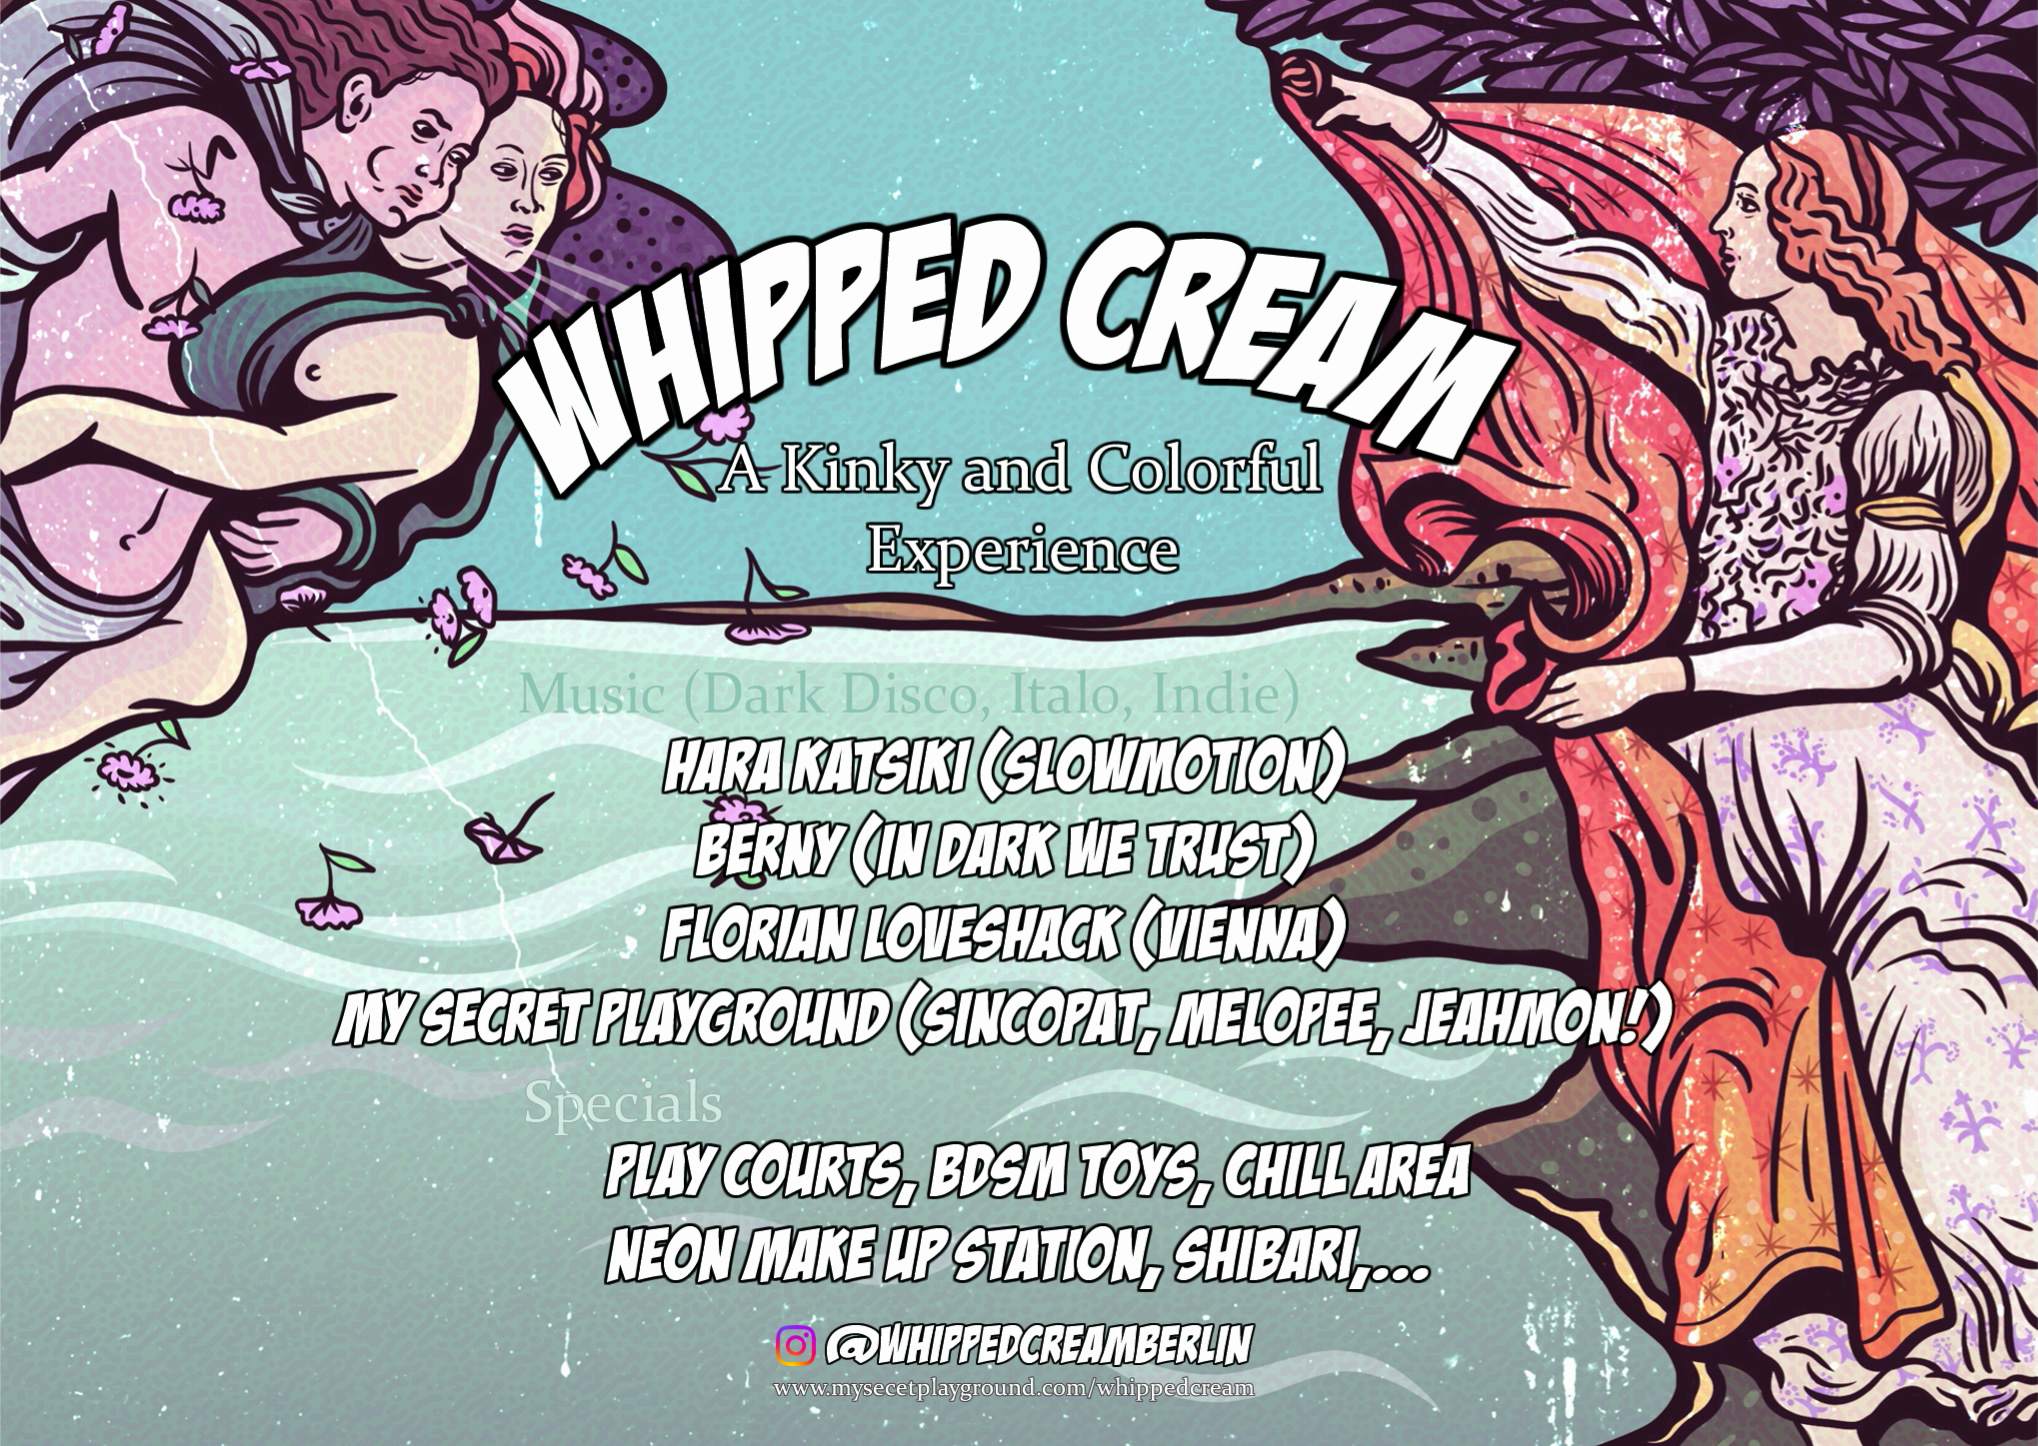 Whipped Cream - A Kinky and Colorful Experience - Página trasera